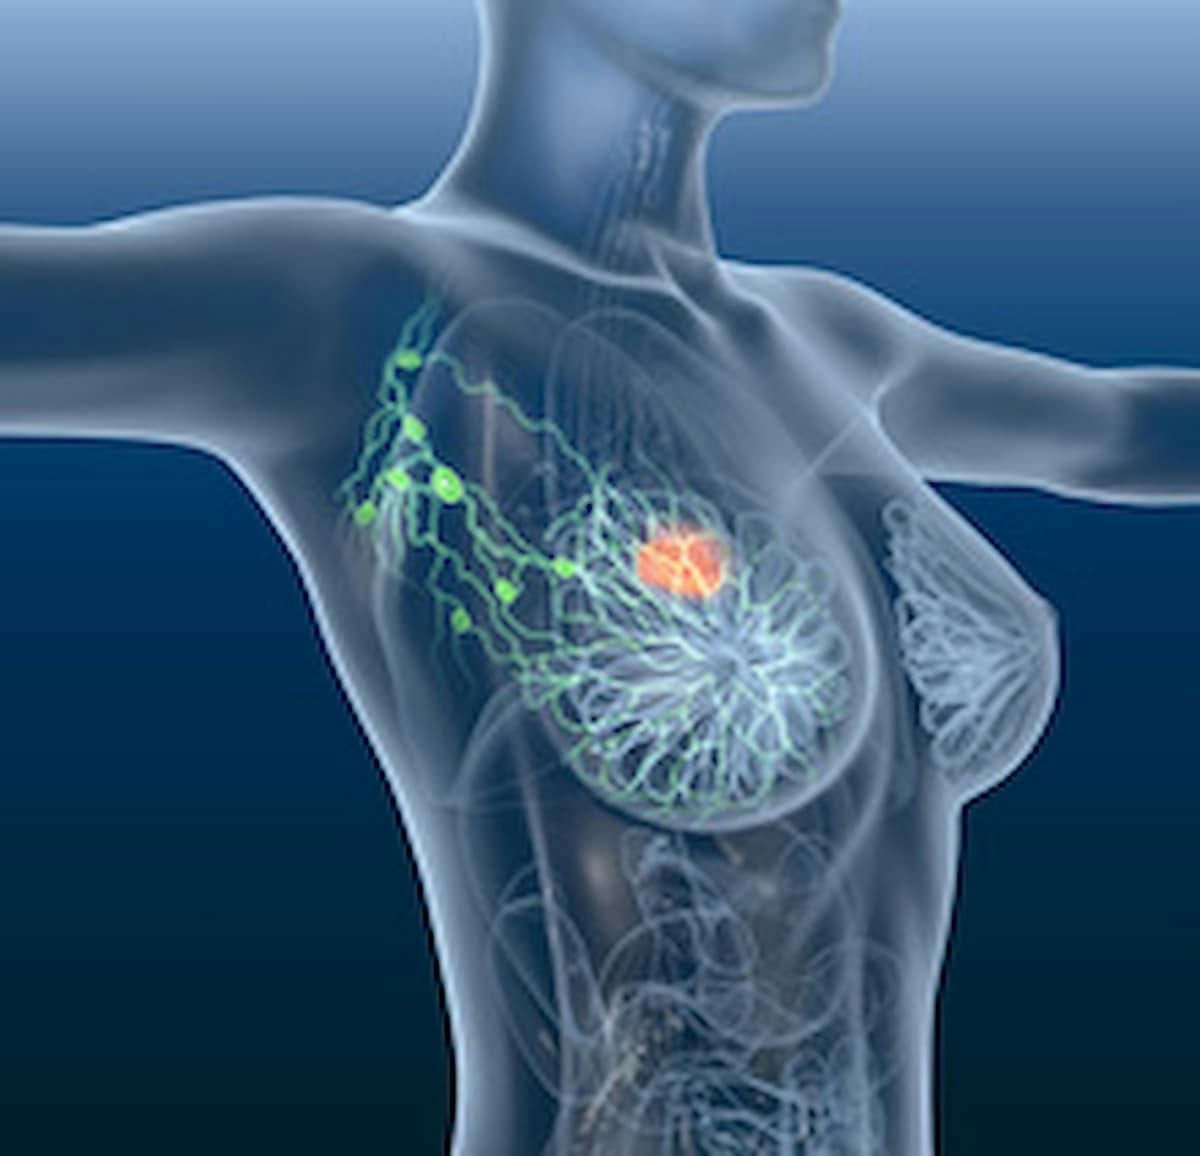 Among patients with advanced and/or metastatic hormone receptor–positive HER-2 negative breast cancer, complete estrogen receptor antagonist OP-1250 continued to yield clinical benefits such as reductions in target tumor lesions.